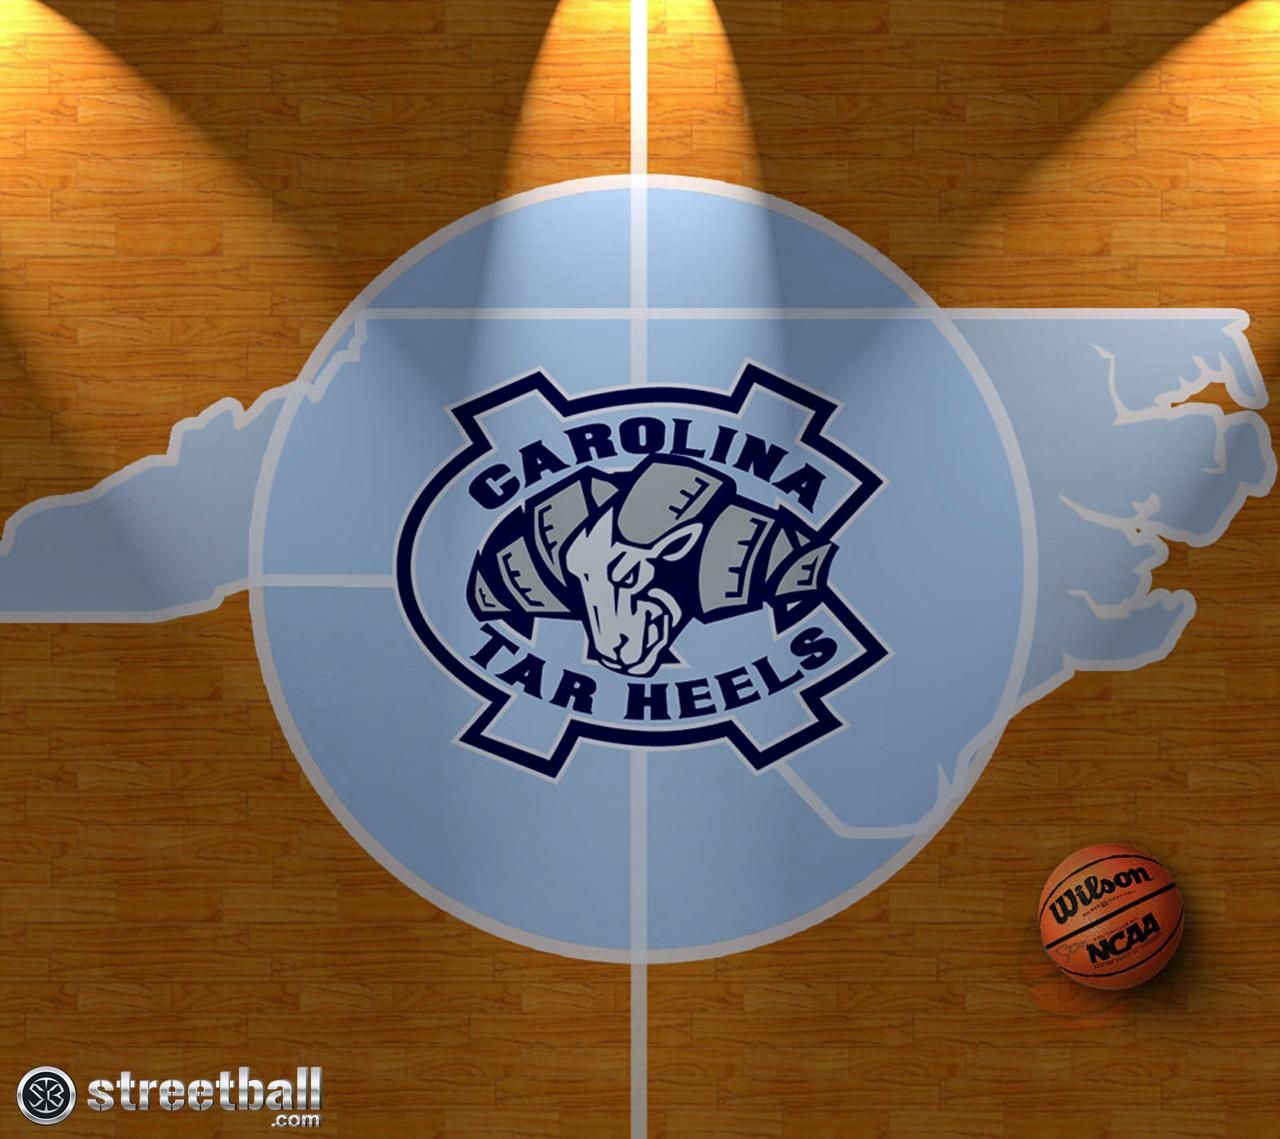 Unc Tar Heels Live Wallpaper Android Apps On Google Play